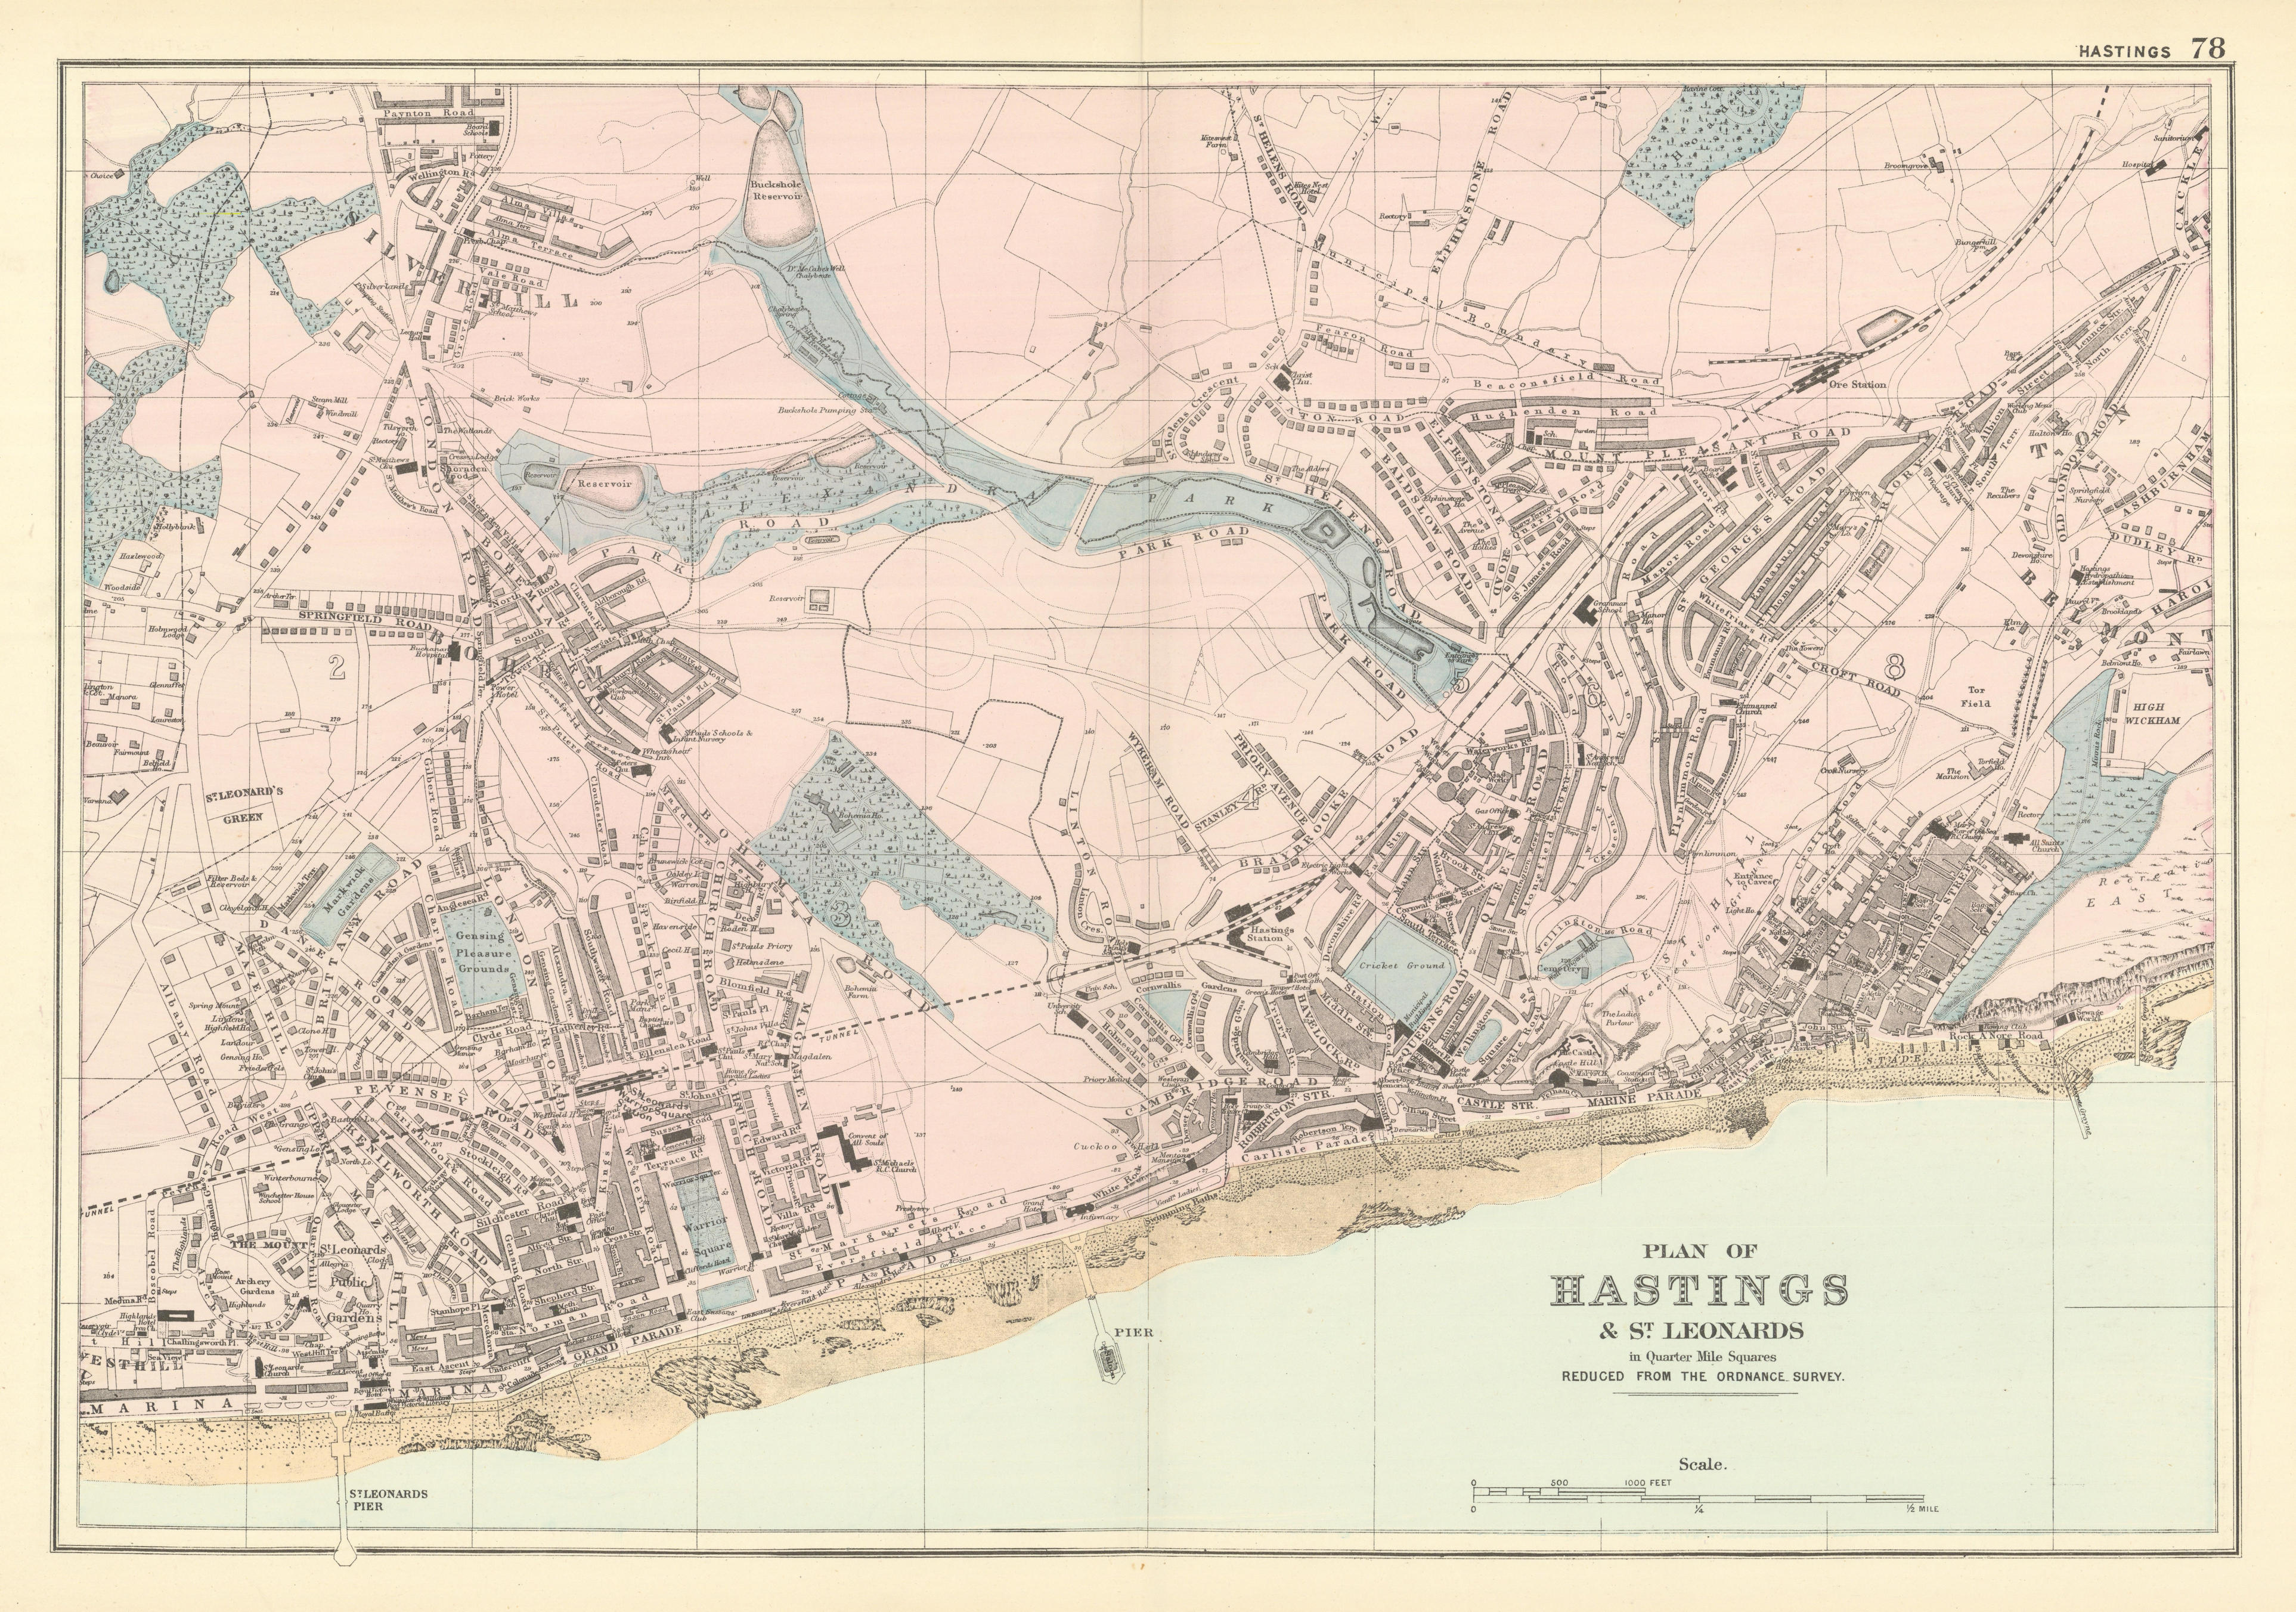 Associate Product HASTINGS & St Leonards town city plan by GW BACON 1891 old antique map chart